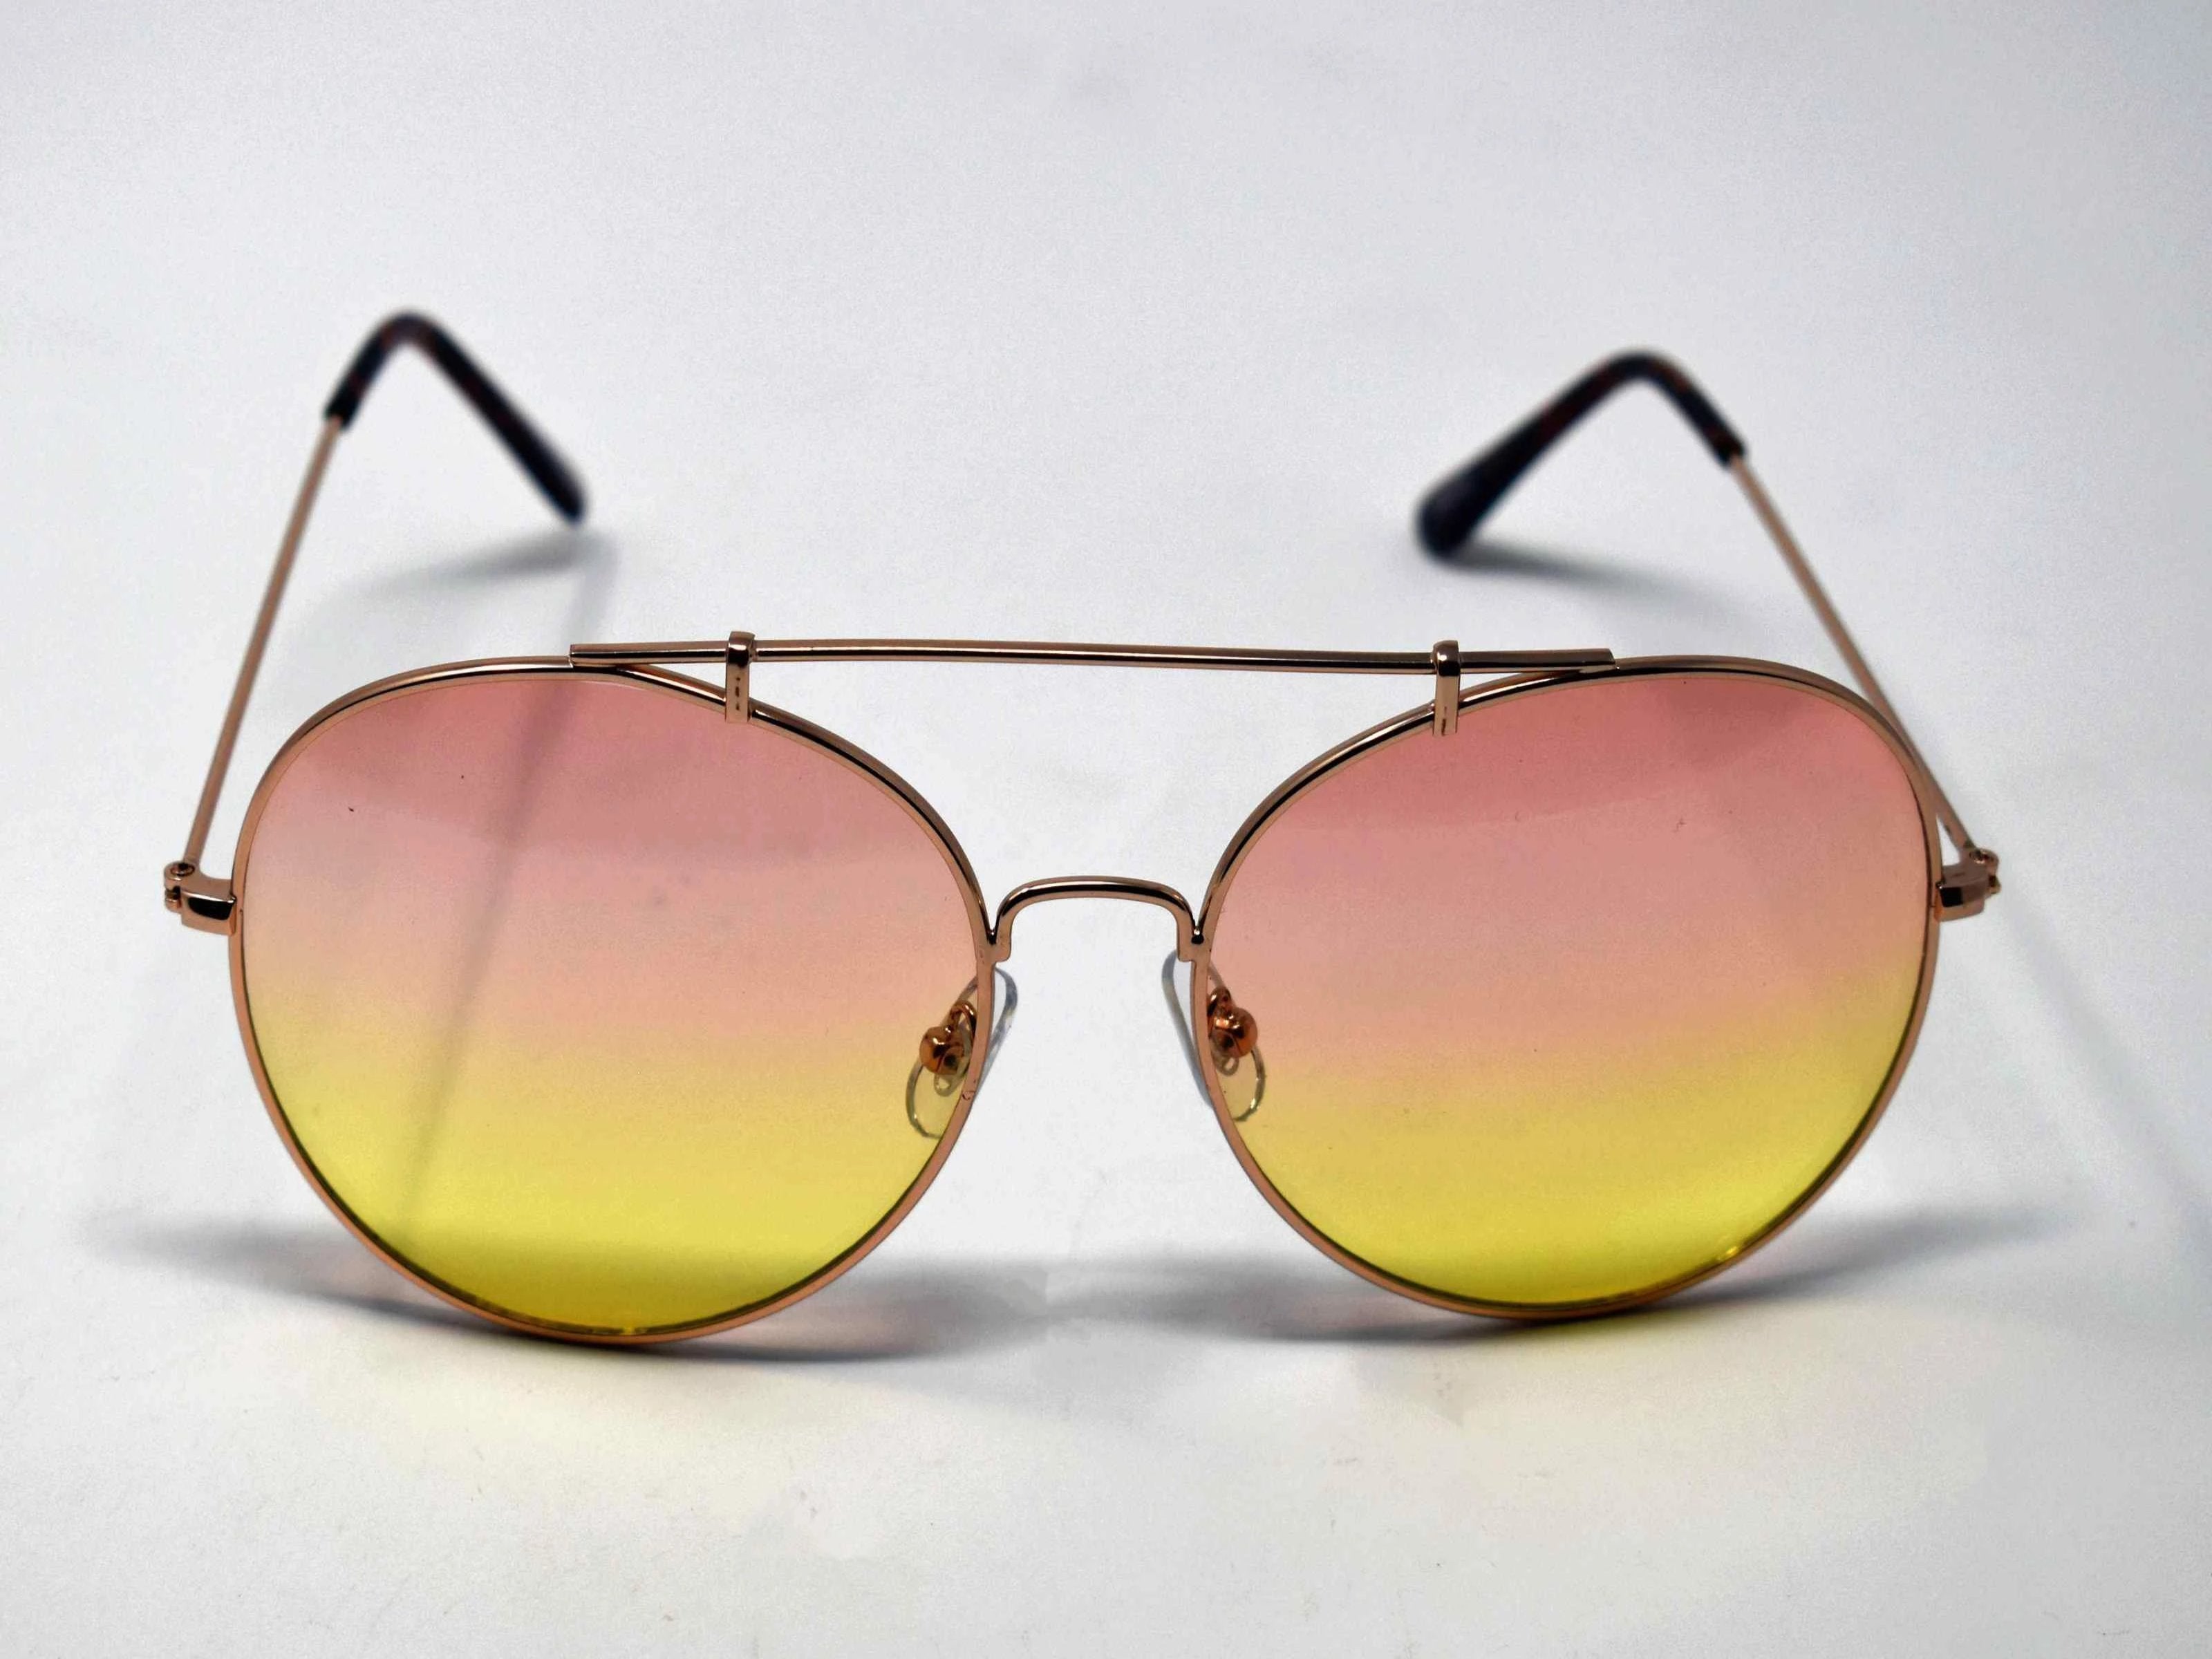 Va Va Voom will be consistently heard in these Vervain gold frame aviator orange and yellow ombre lens sunglasses.